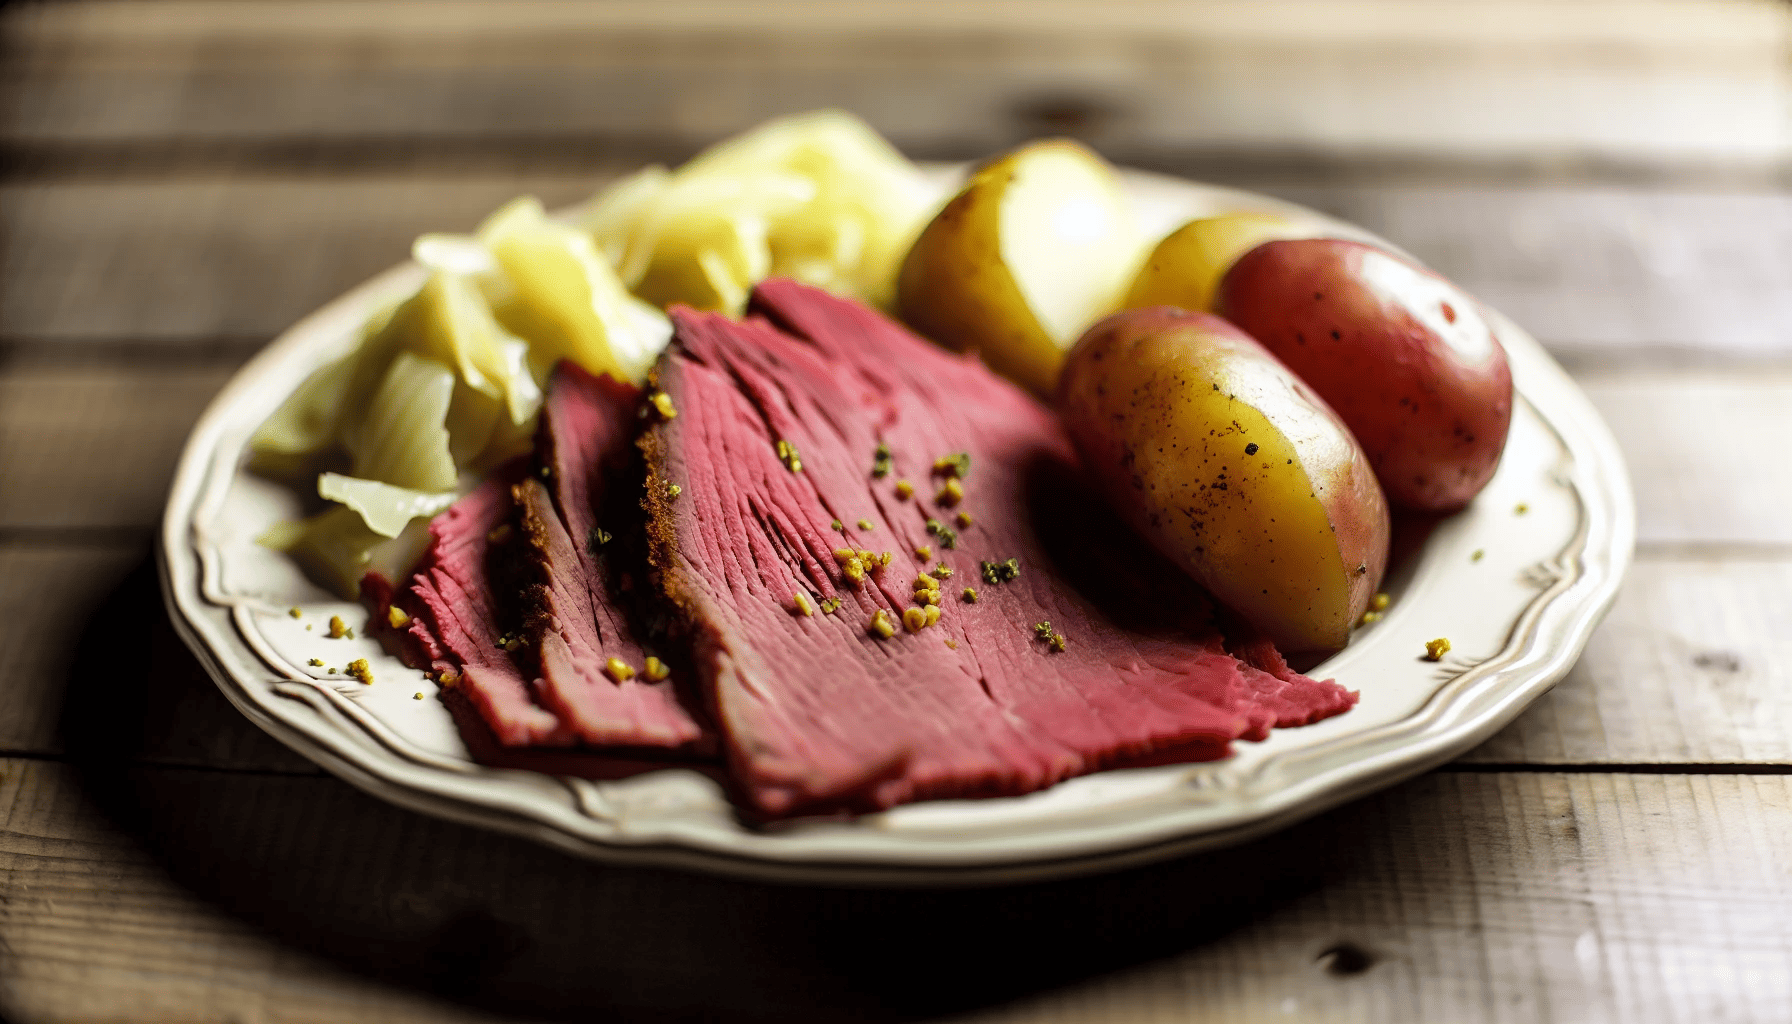 A plate of sliced corned beef with boiled potatoes and cabbage